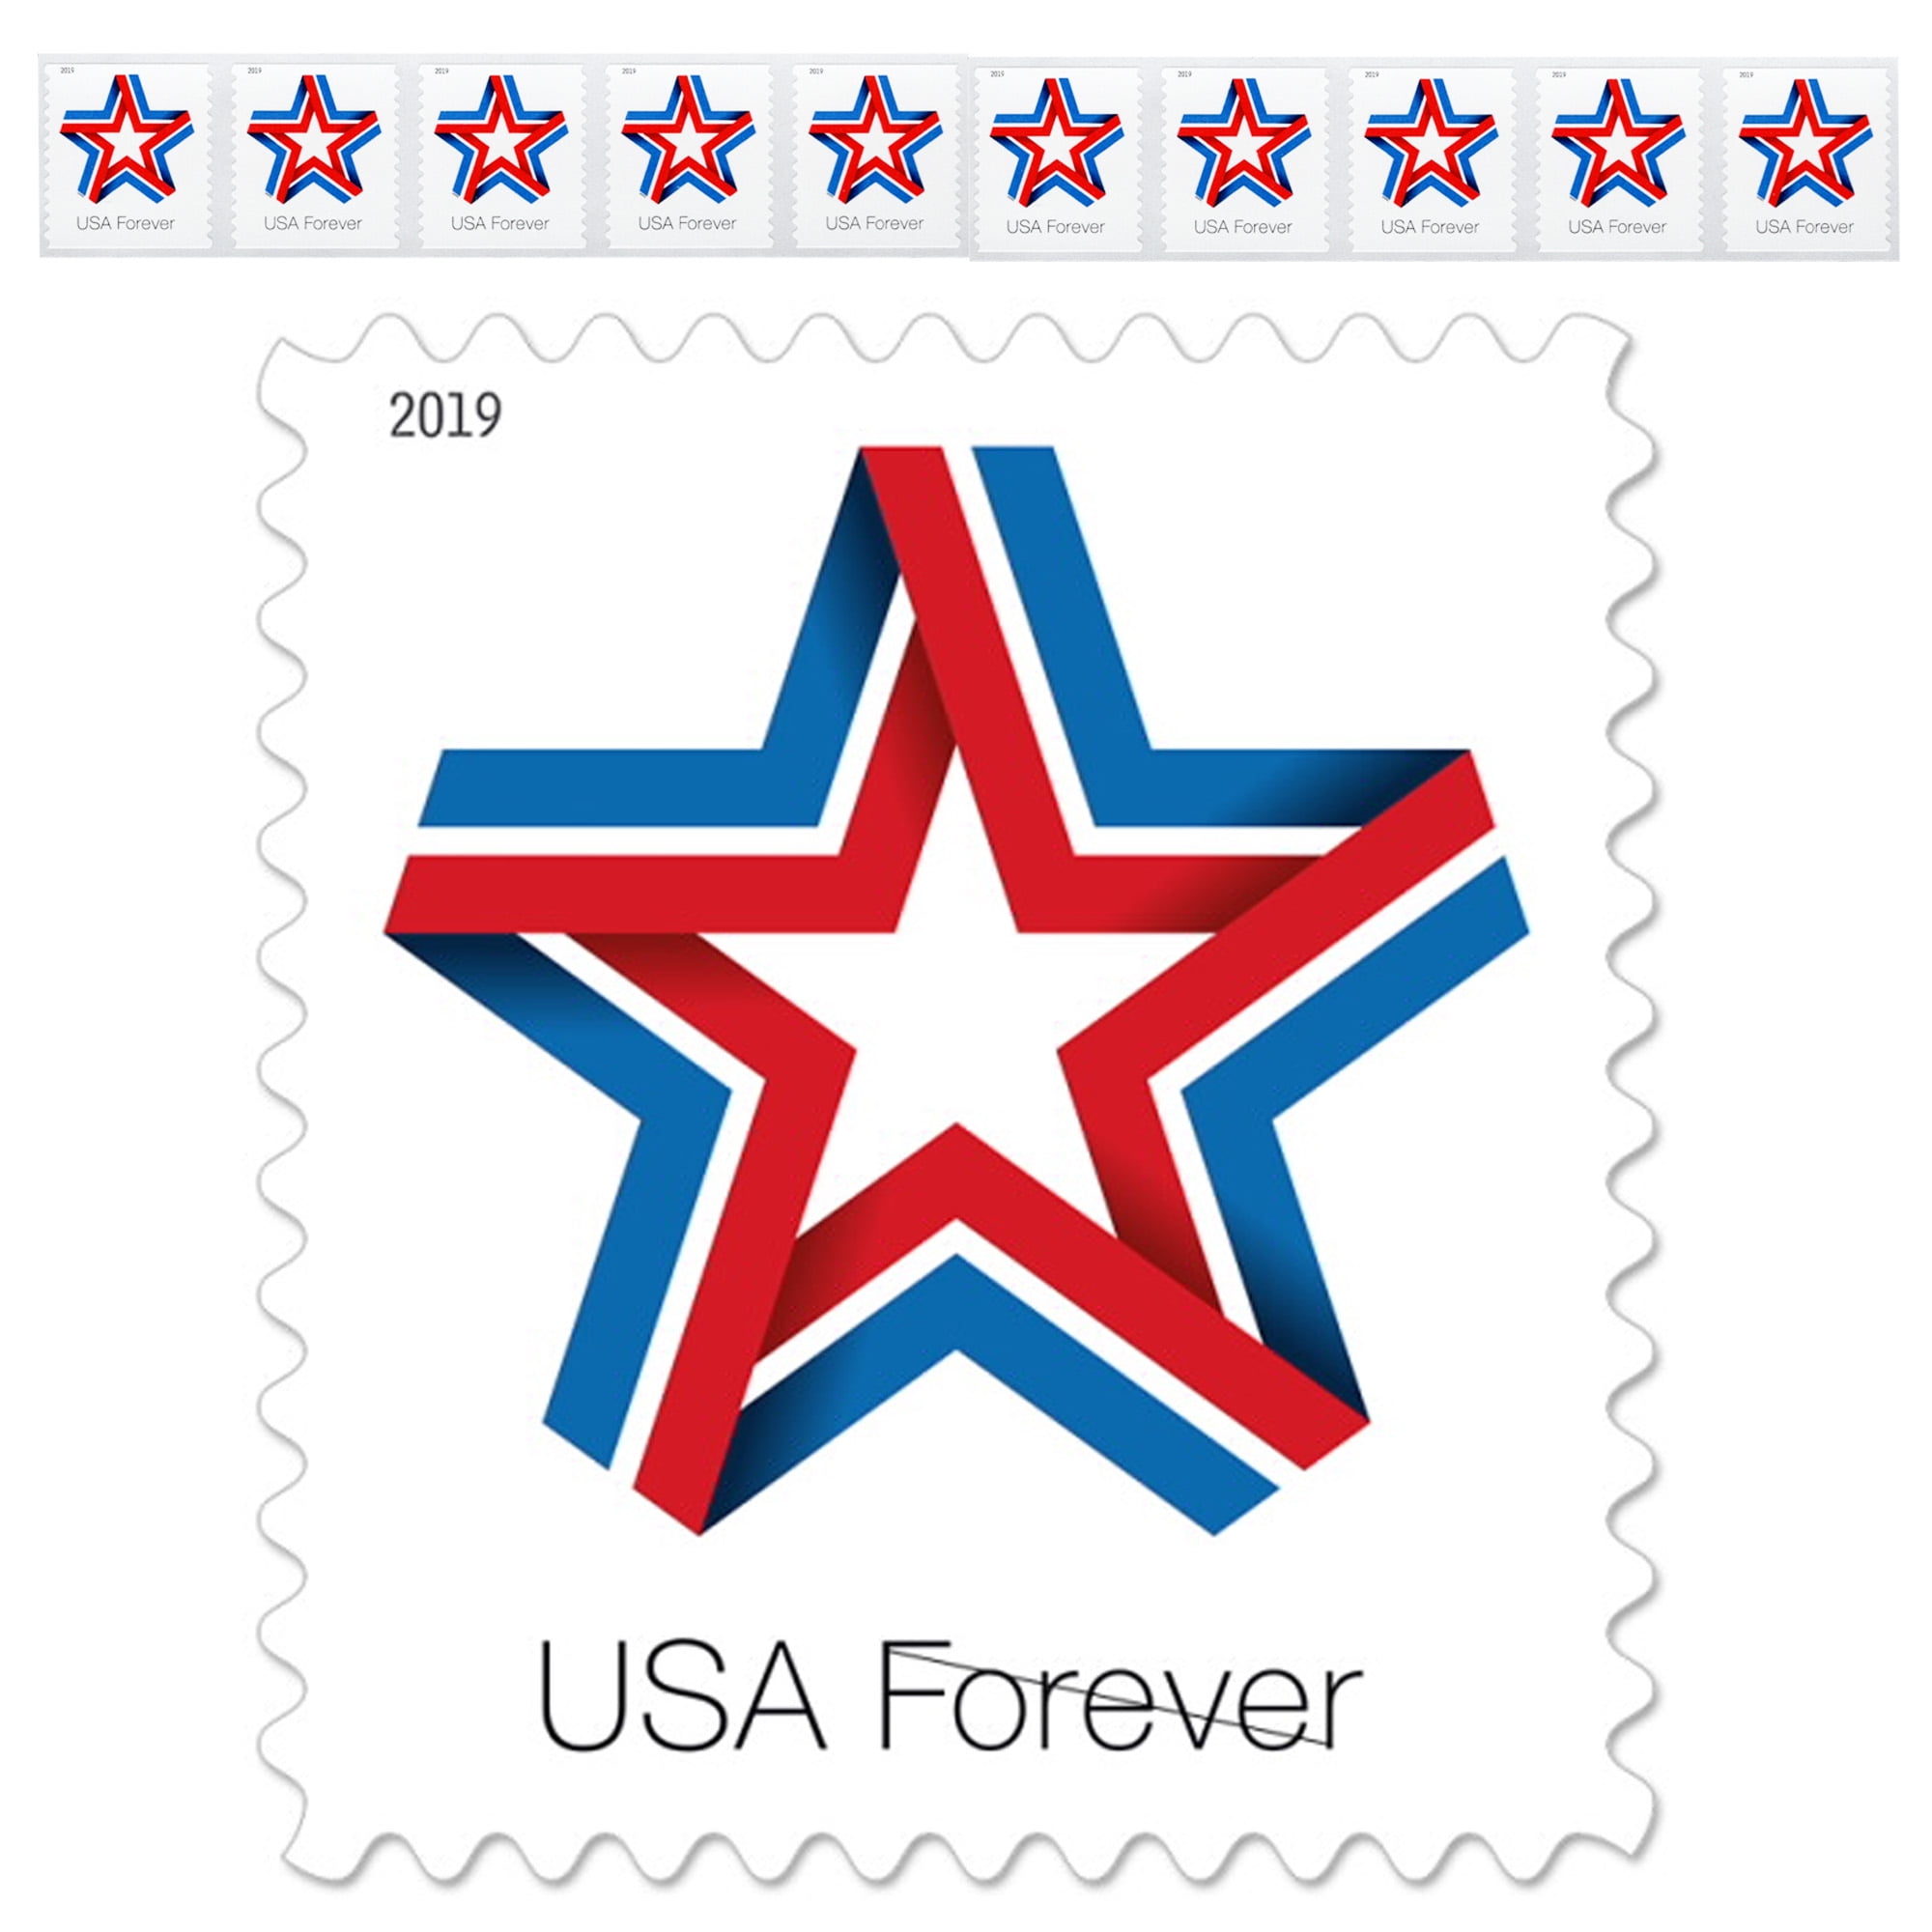 Save the USPS Buy Stamps Digital Art for Yard Sign, Sticker or More 